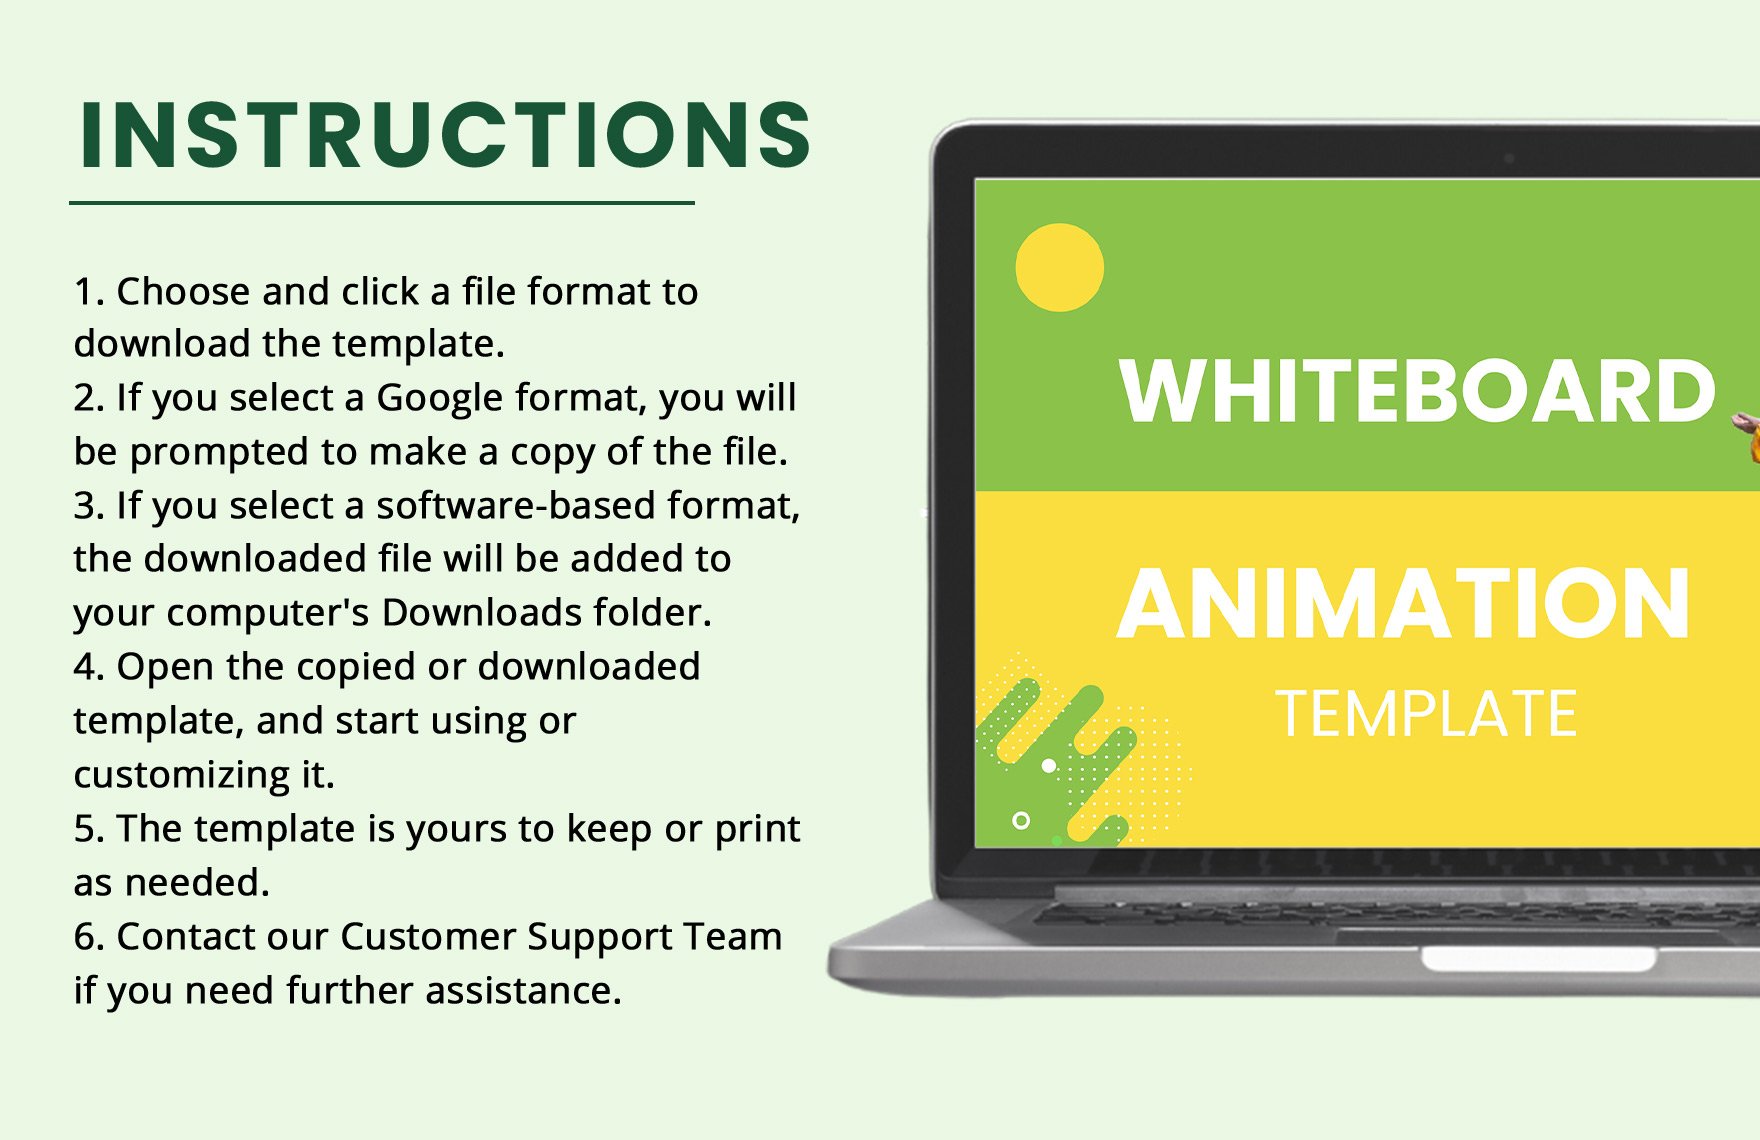 Whiteboard Animation Template